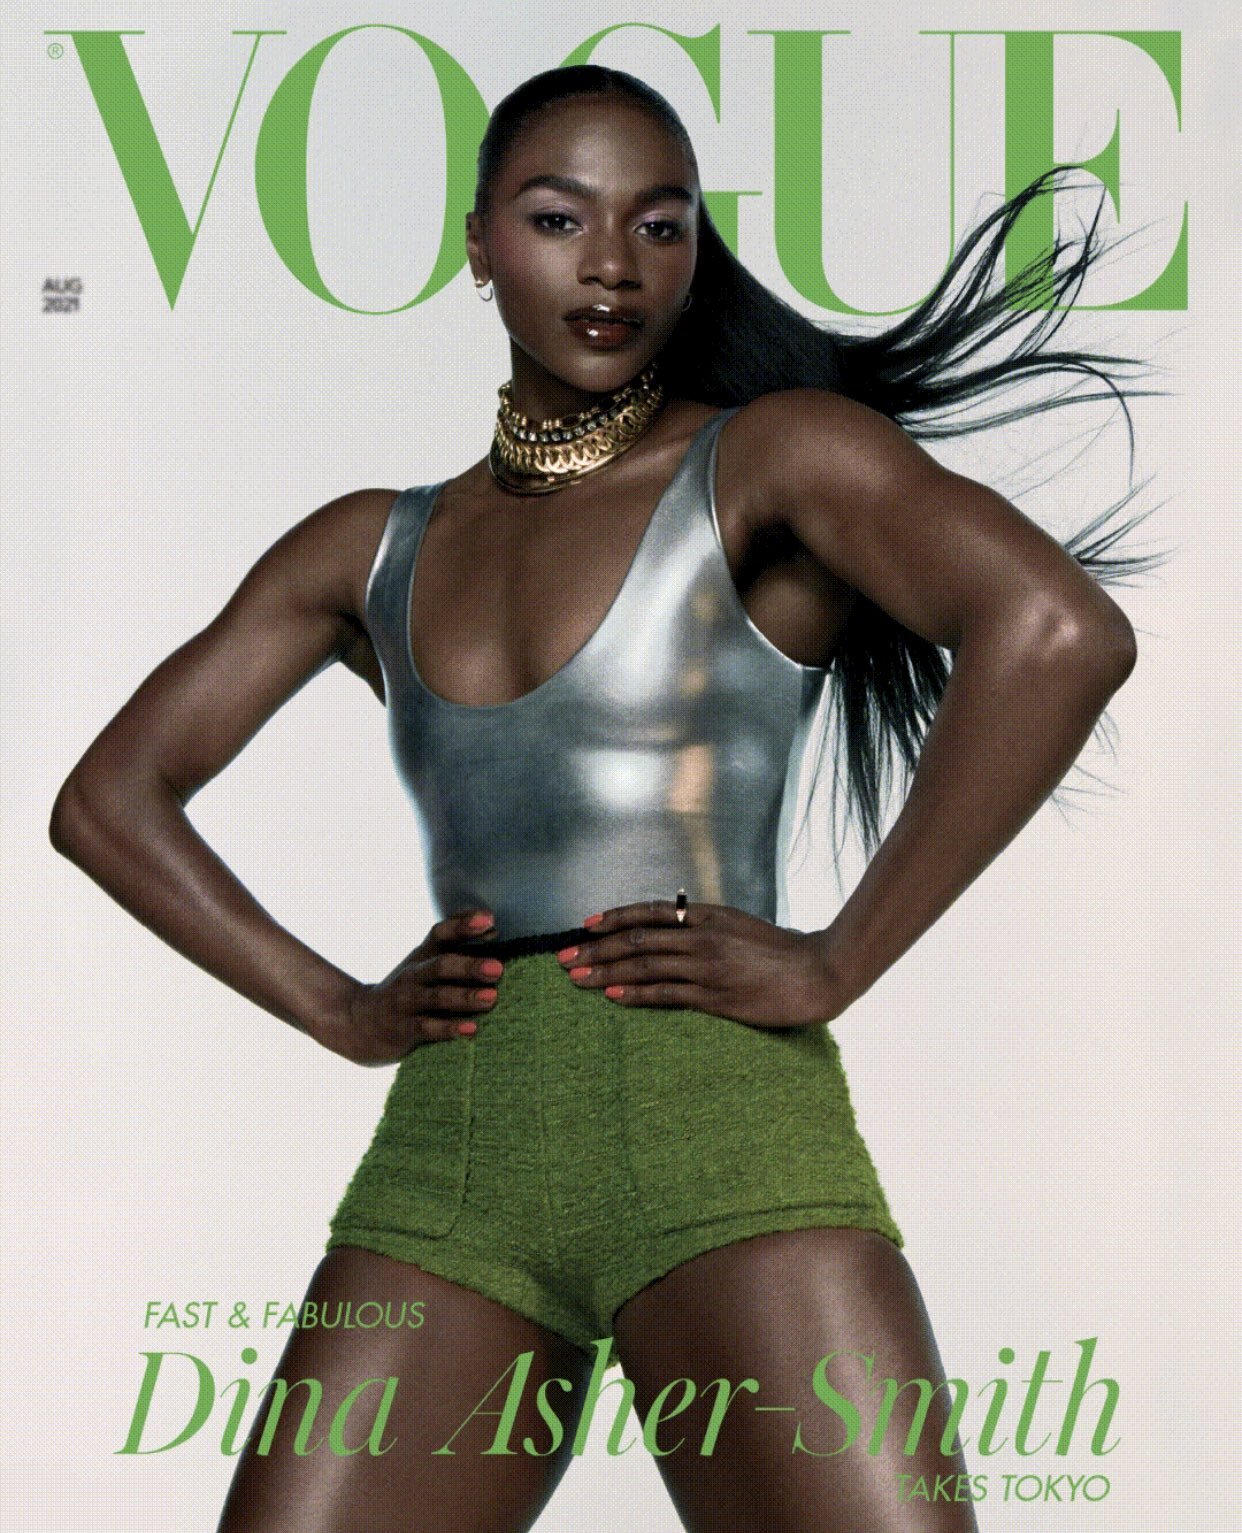 Dina-Asher-Smith-Charlotte-Wales-Vogue-UK-August-2021 (1).jpg